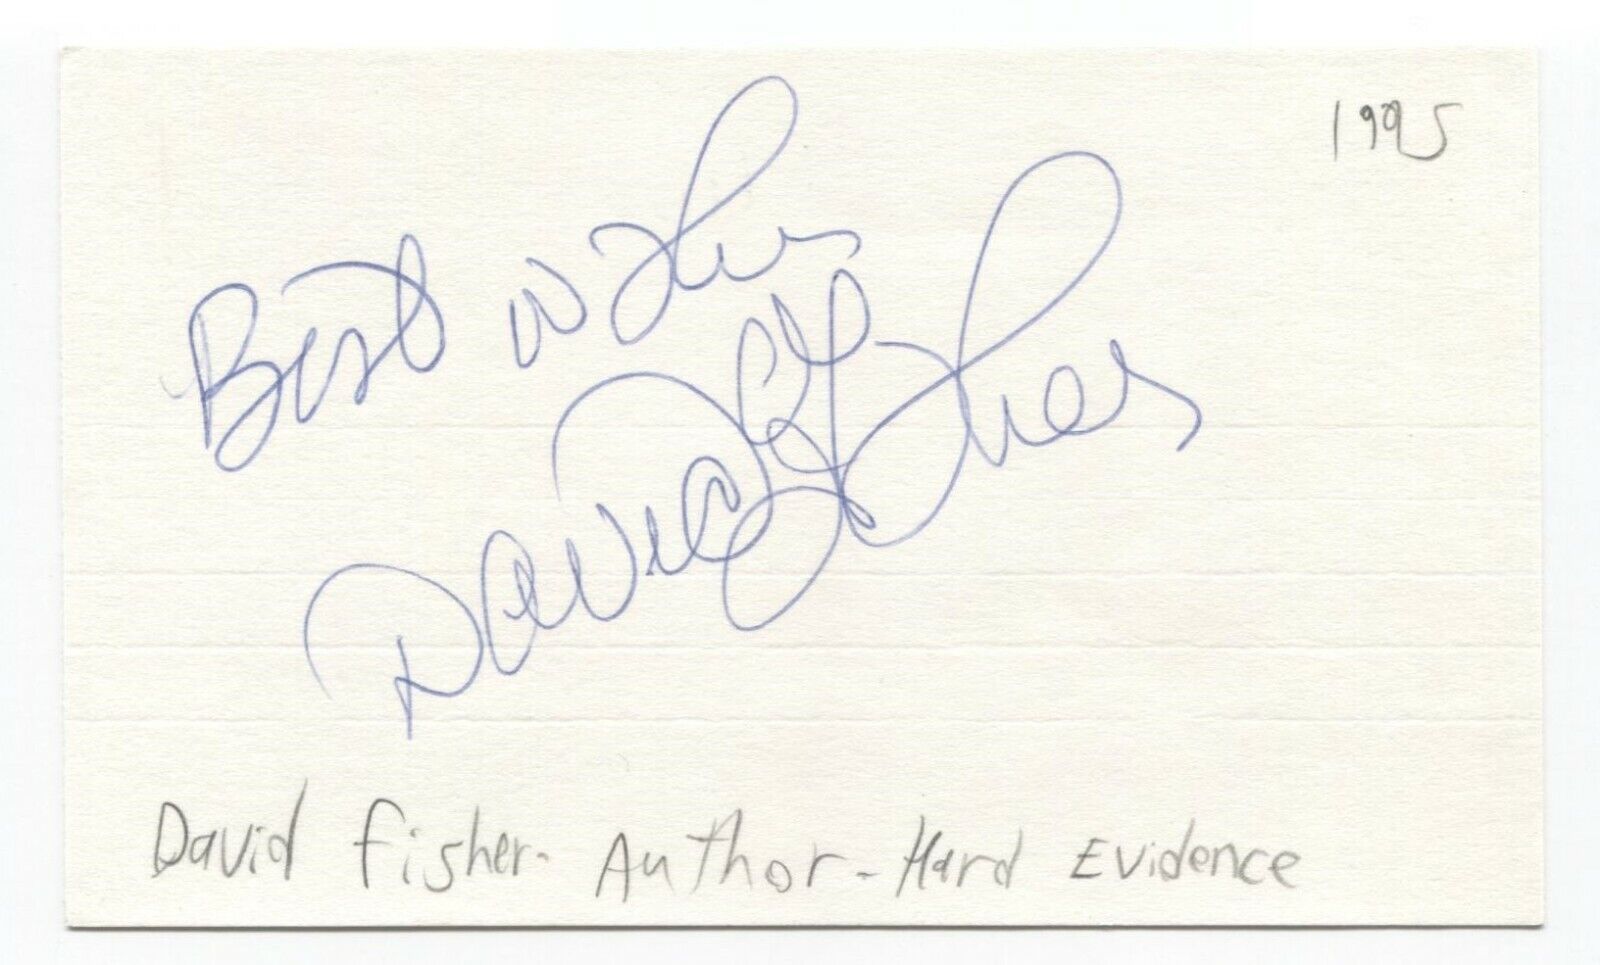 David Fisher Signed 3x5 Index Card Autographed Signature Author Writer